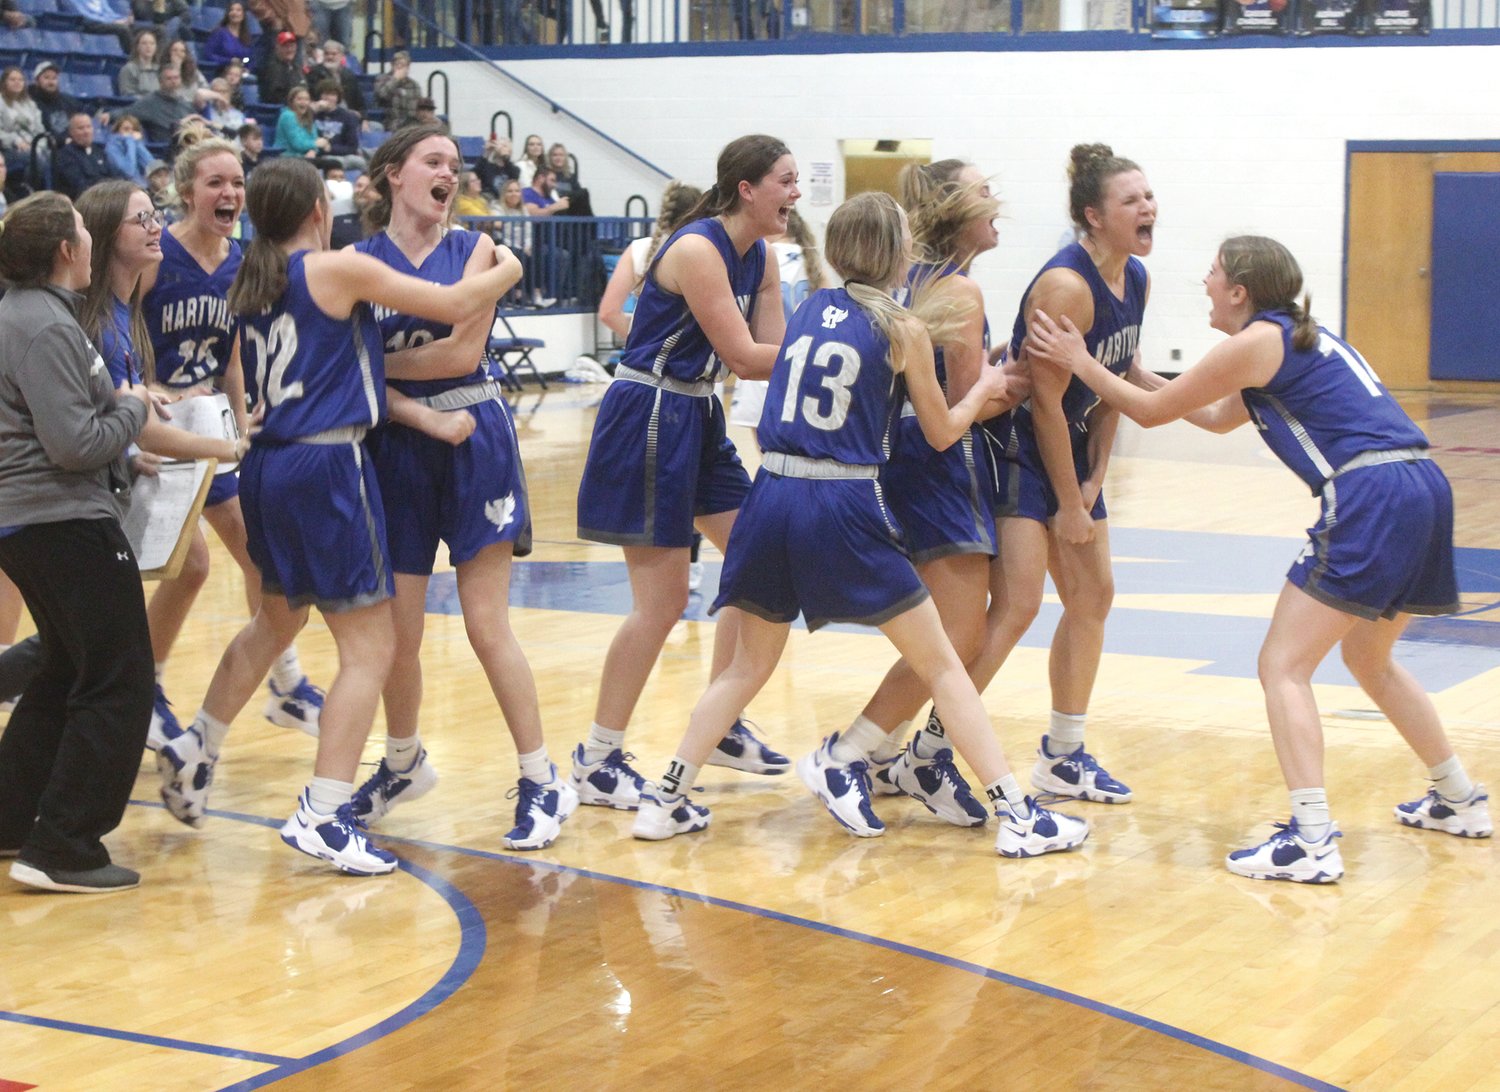 McKinley Sanders and her teammates are pumped after the winning shot.